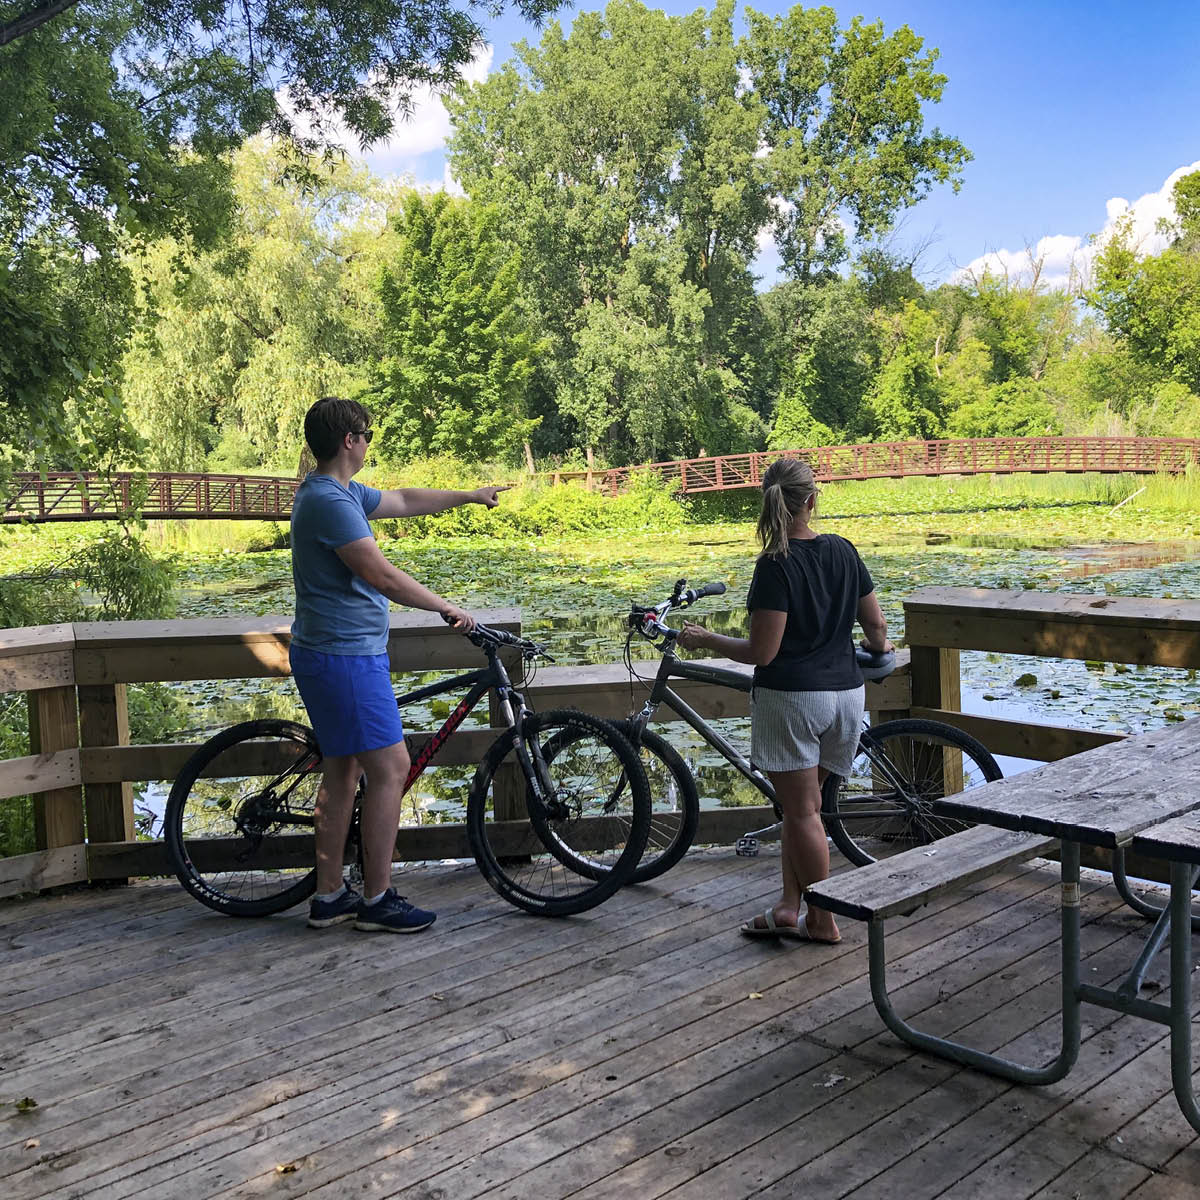 Bikers stopping to look at the Chippewa River.